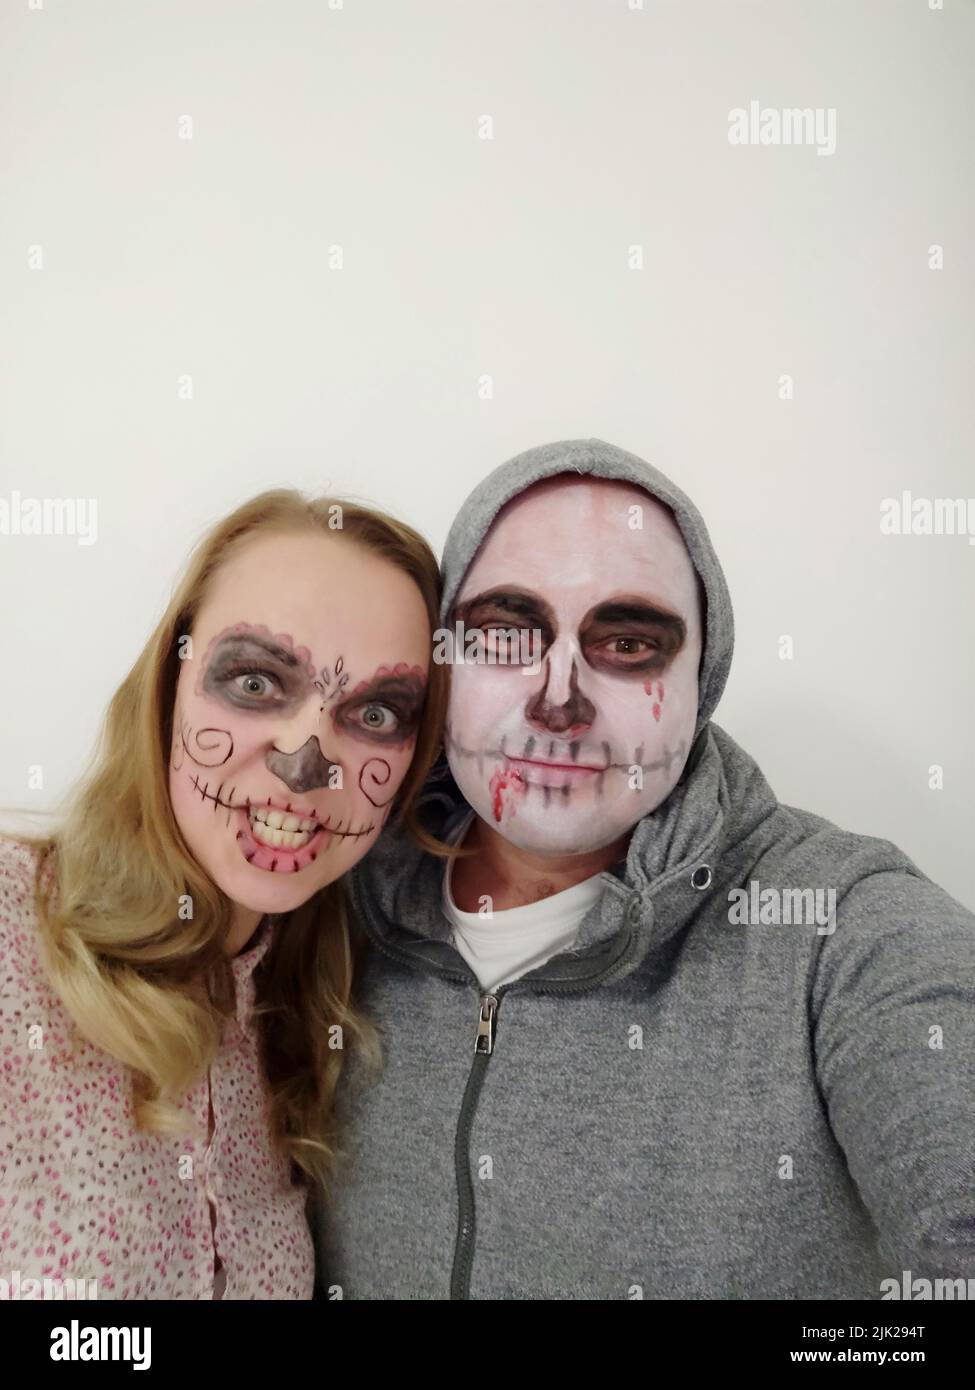 Young people with a painted skull on their face on a white background. Celebration of the Day of the Dead Stock Photo